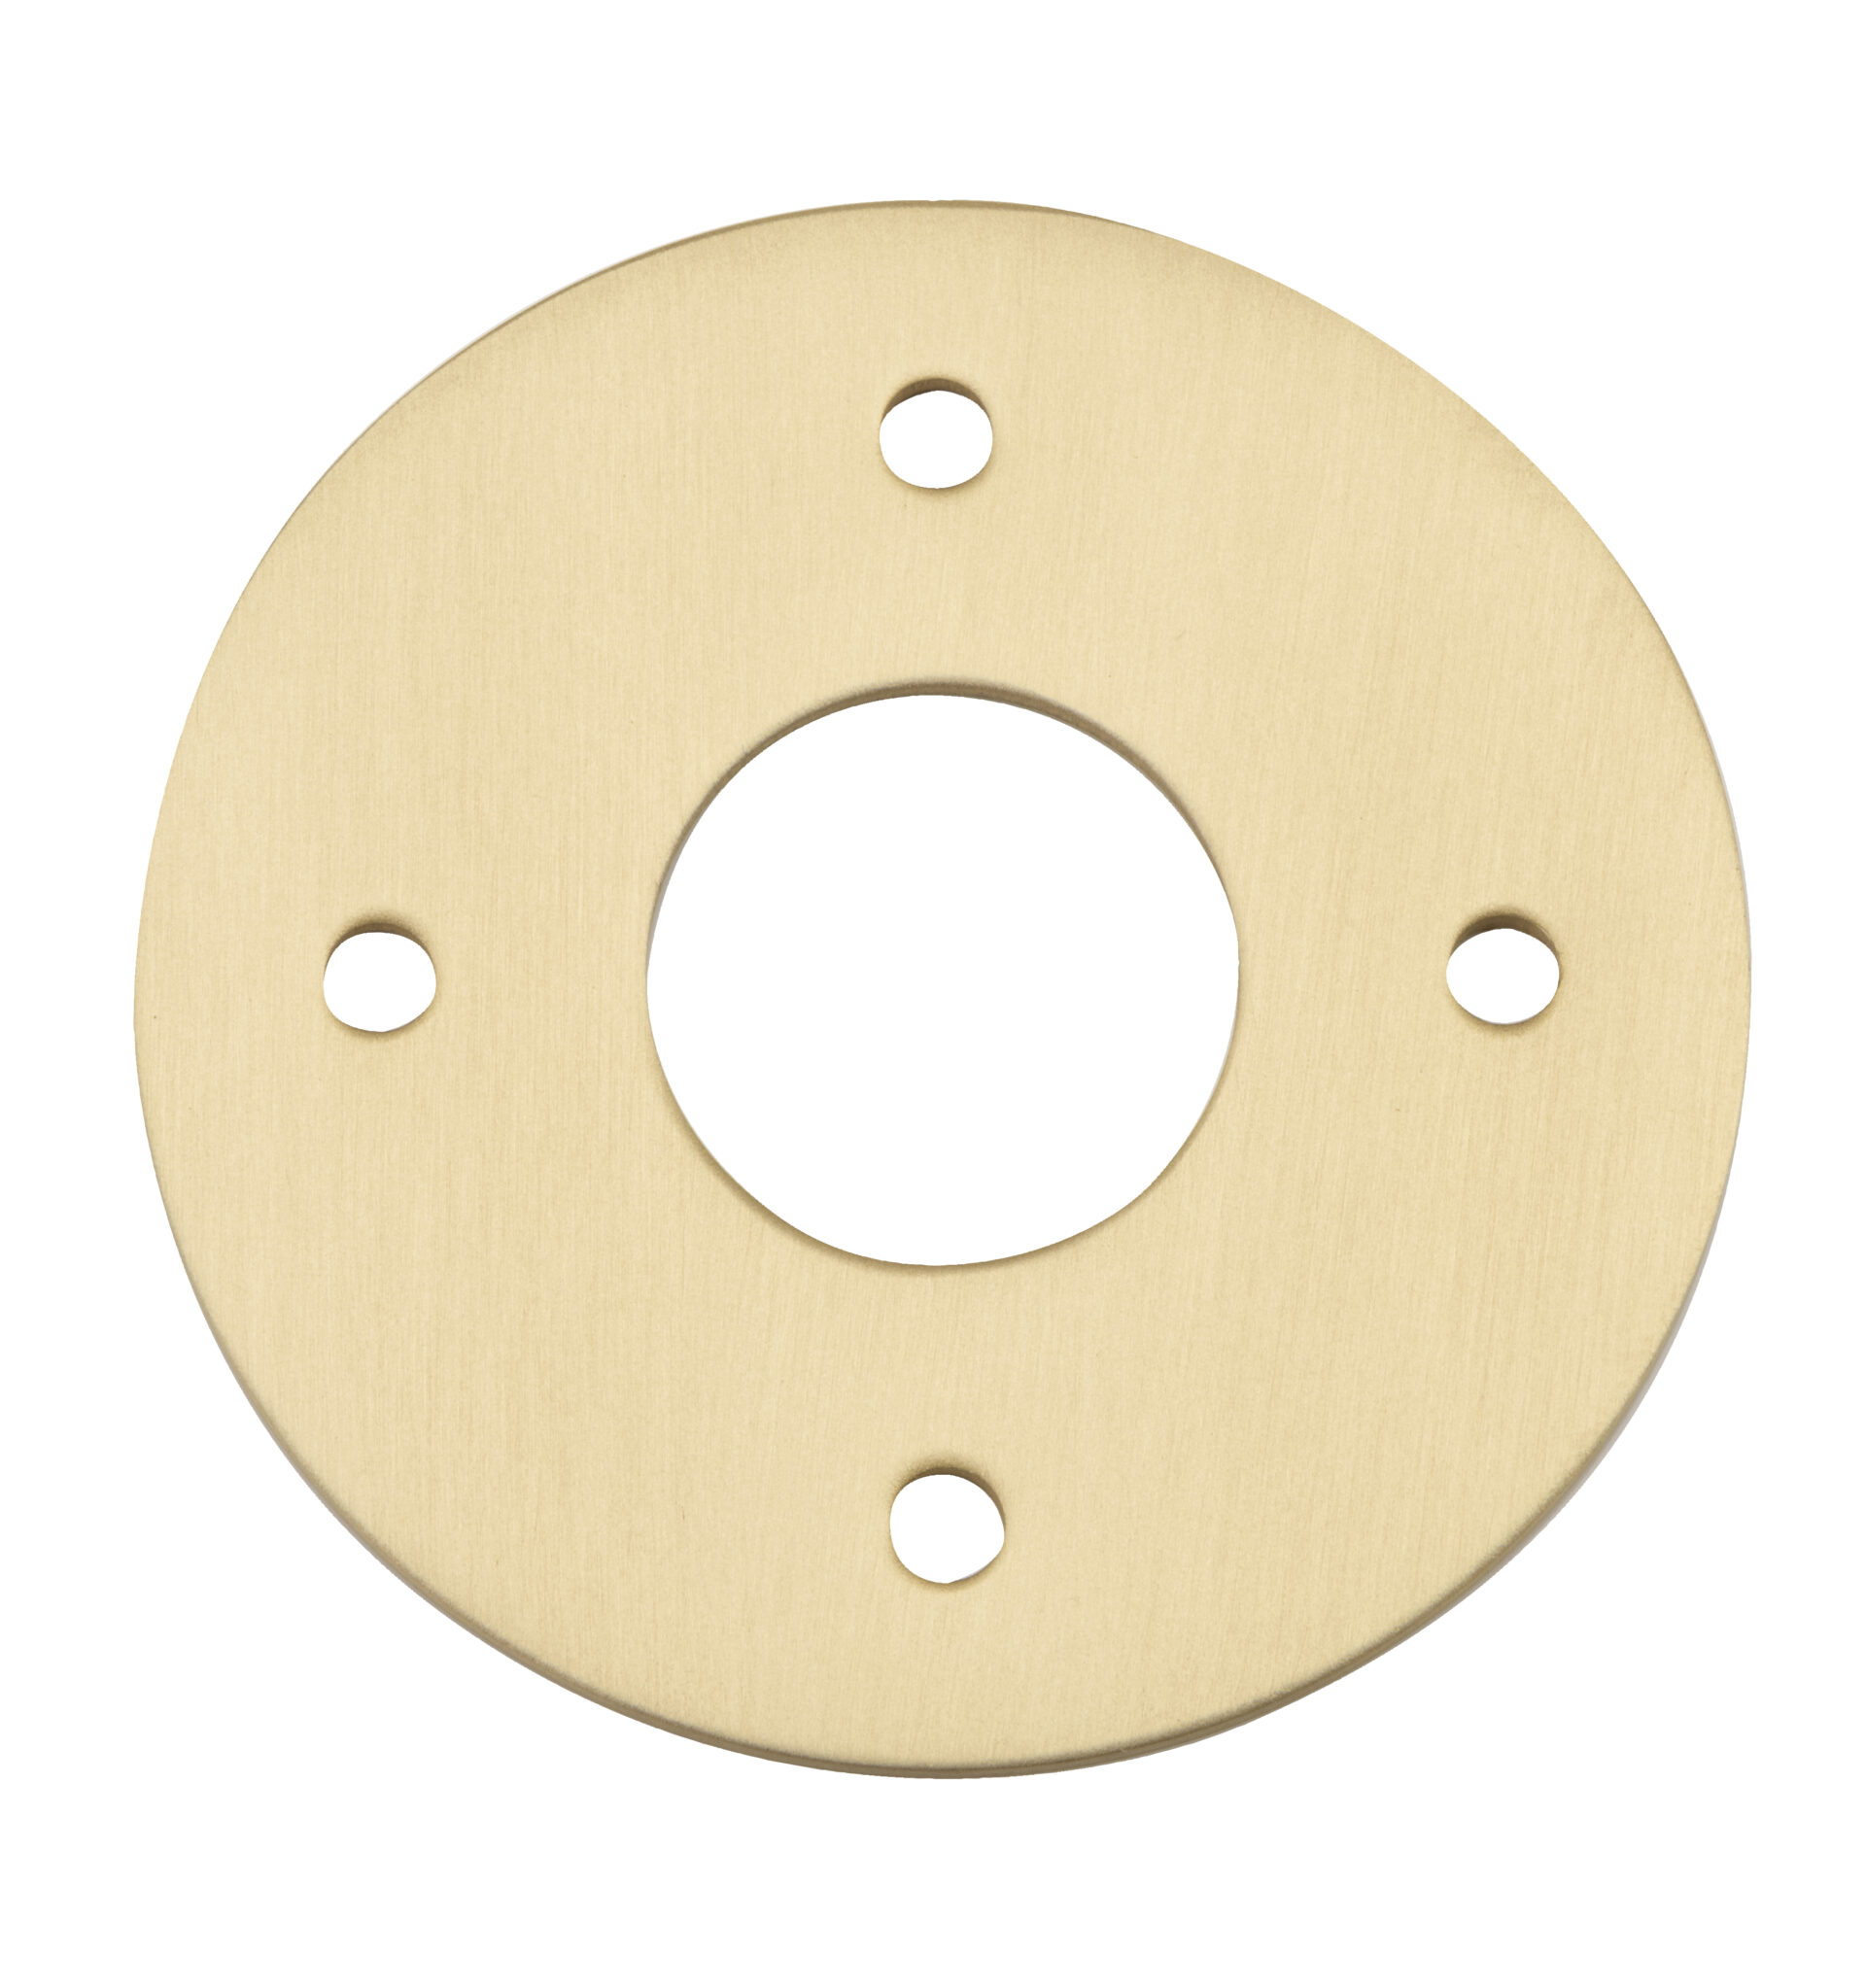 17125 - Adaptor Plate - Round - Brushed Gold PVD